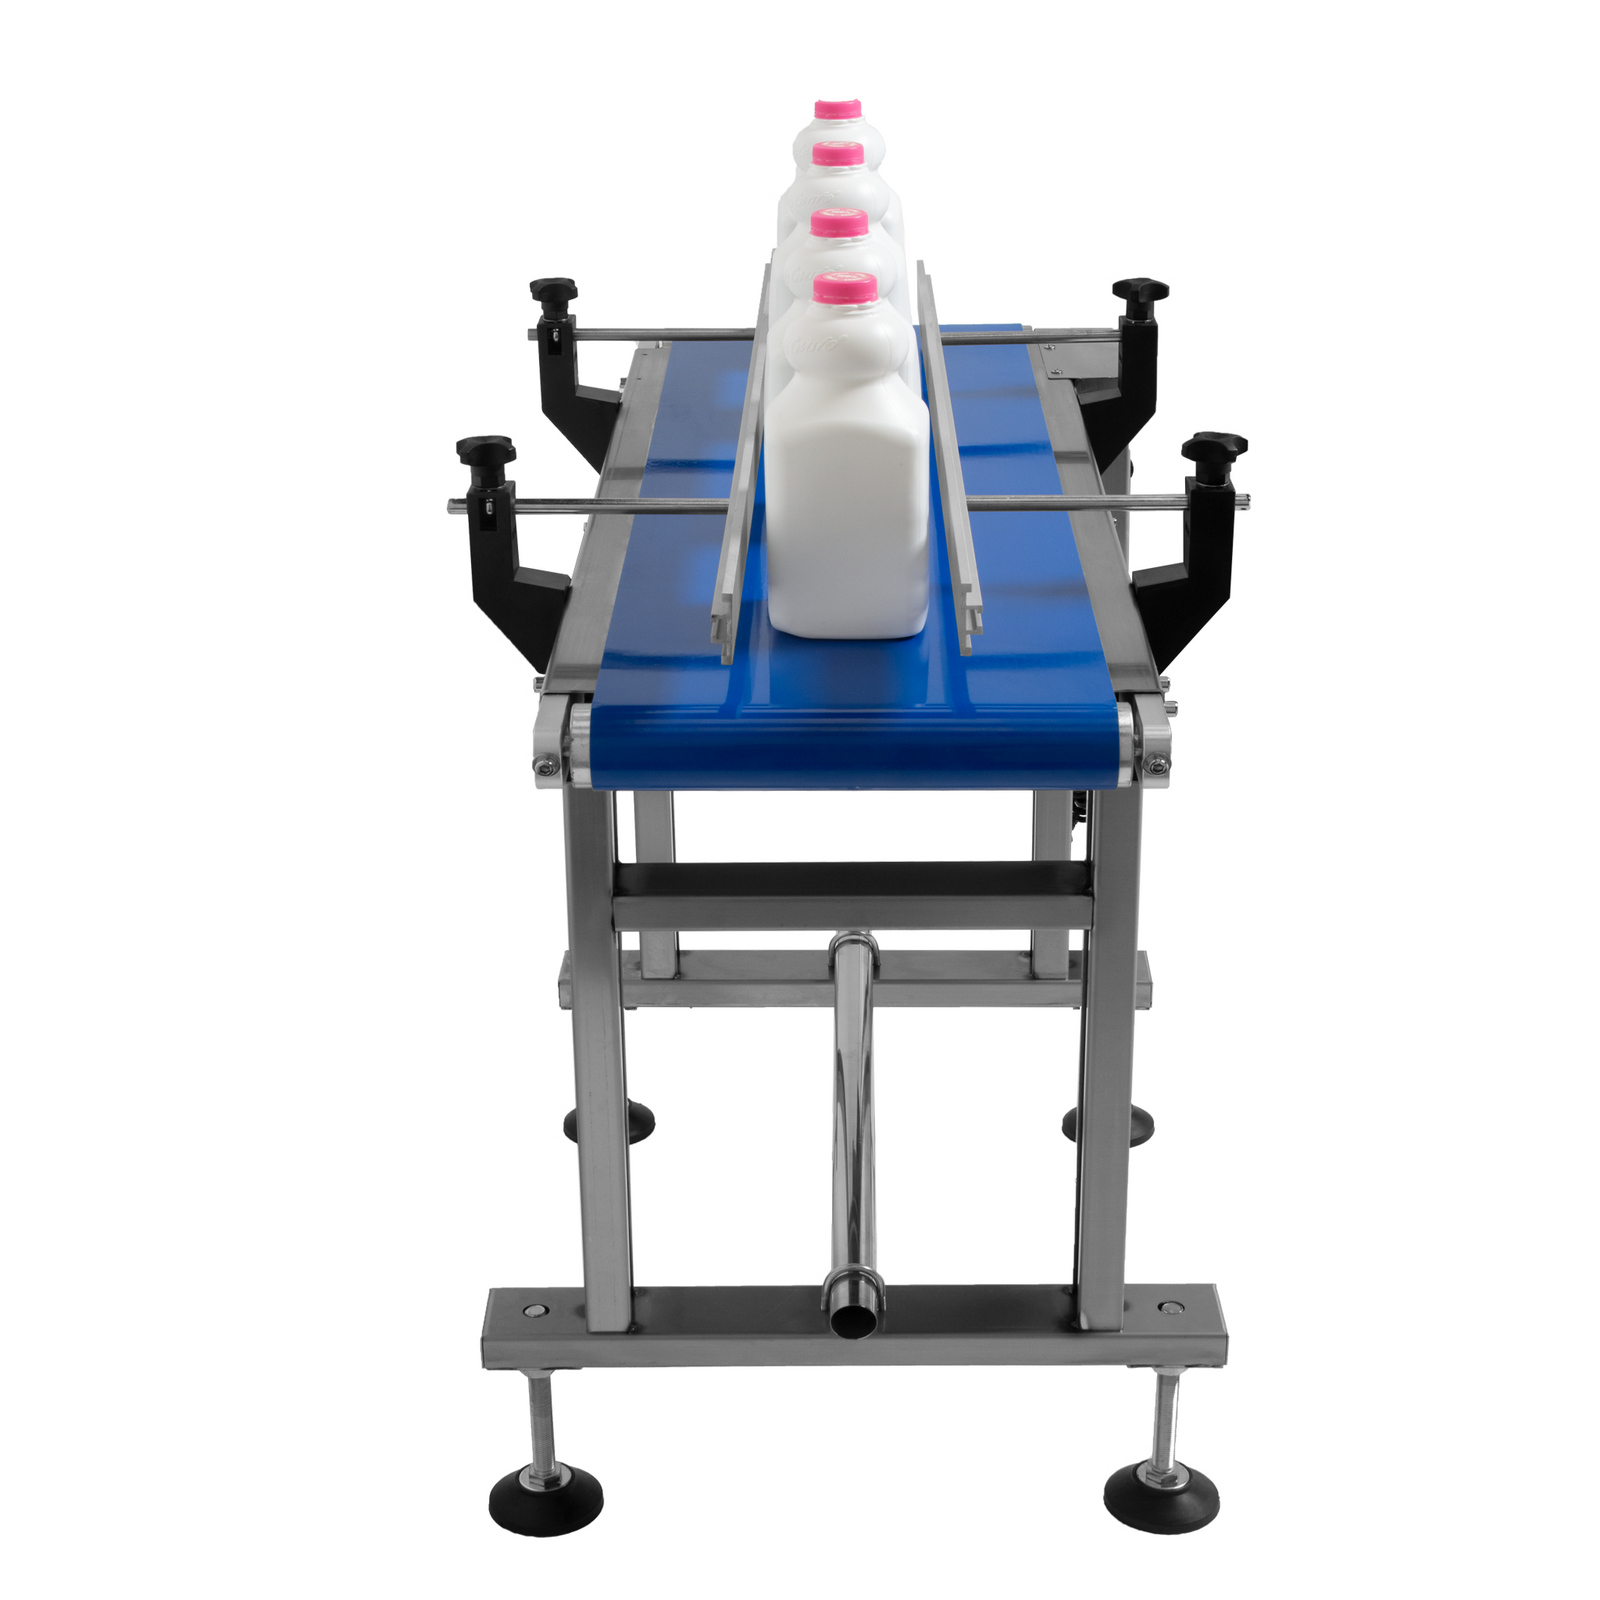 motorized conveyor with steel frame and blue belt that features side guard rails transporting white milk bottles